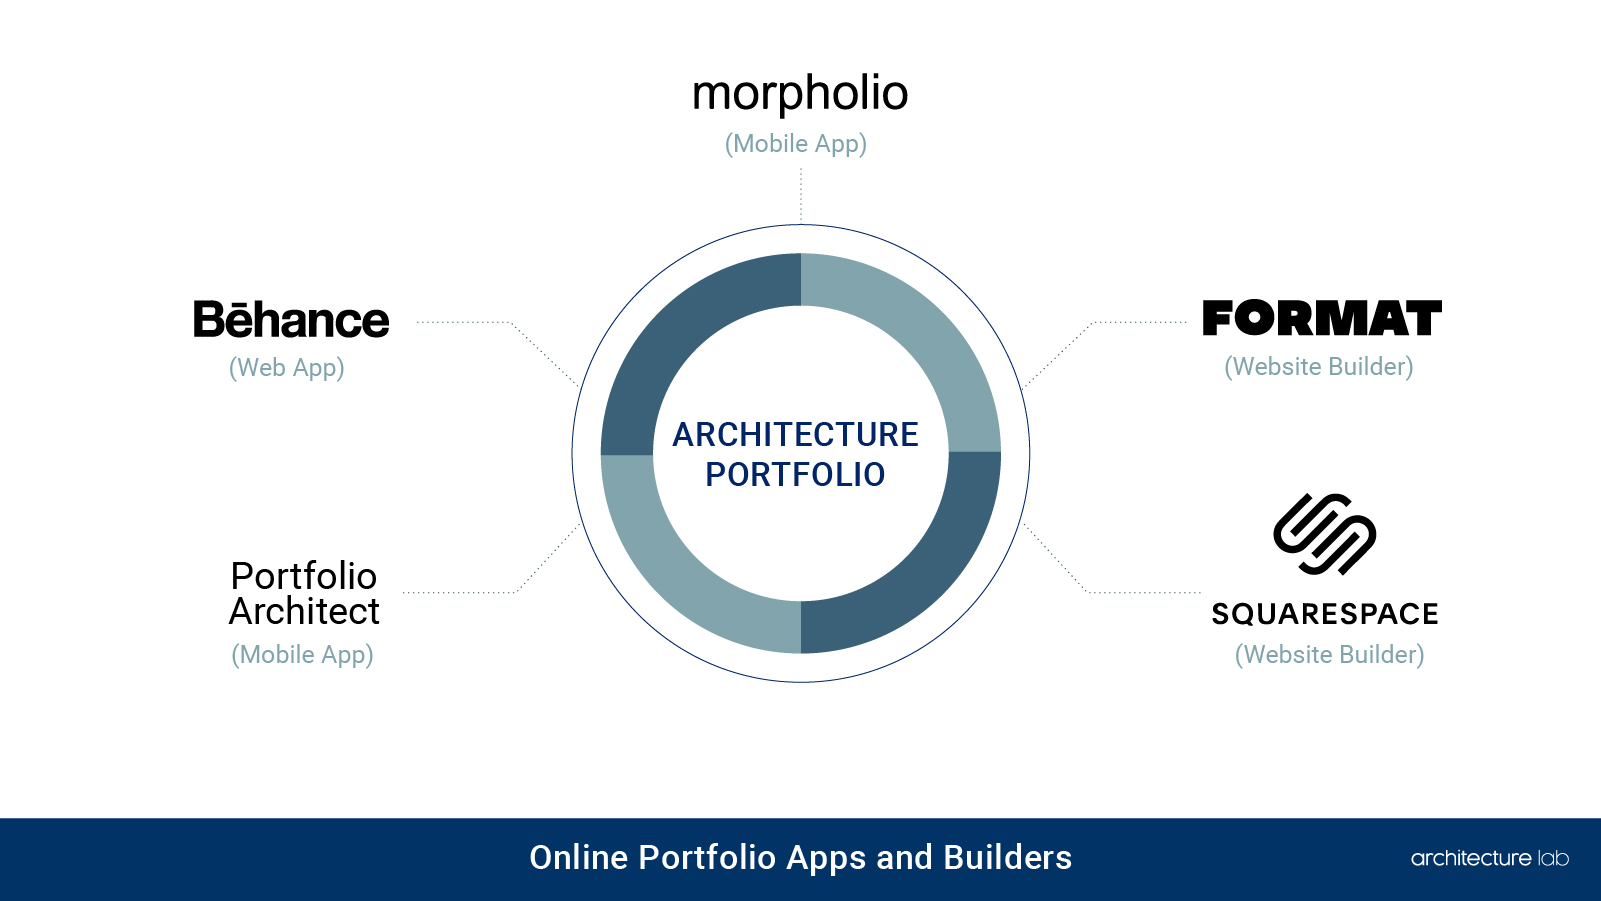 What apps can architects use to create a portfolio online?